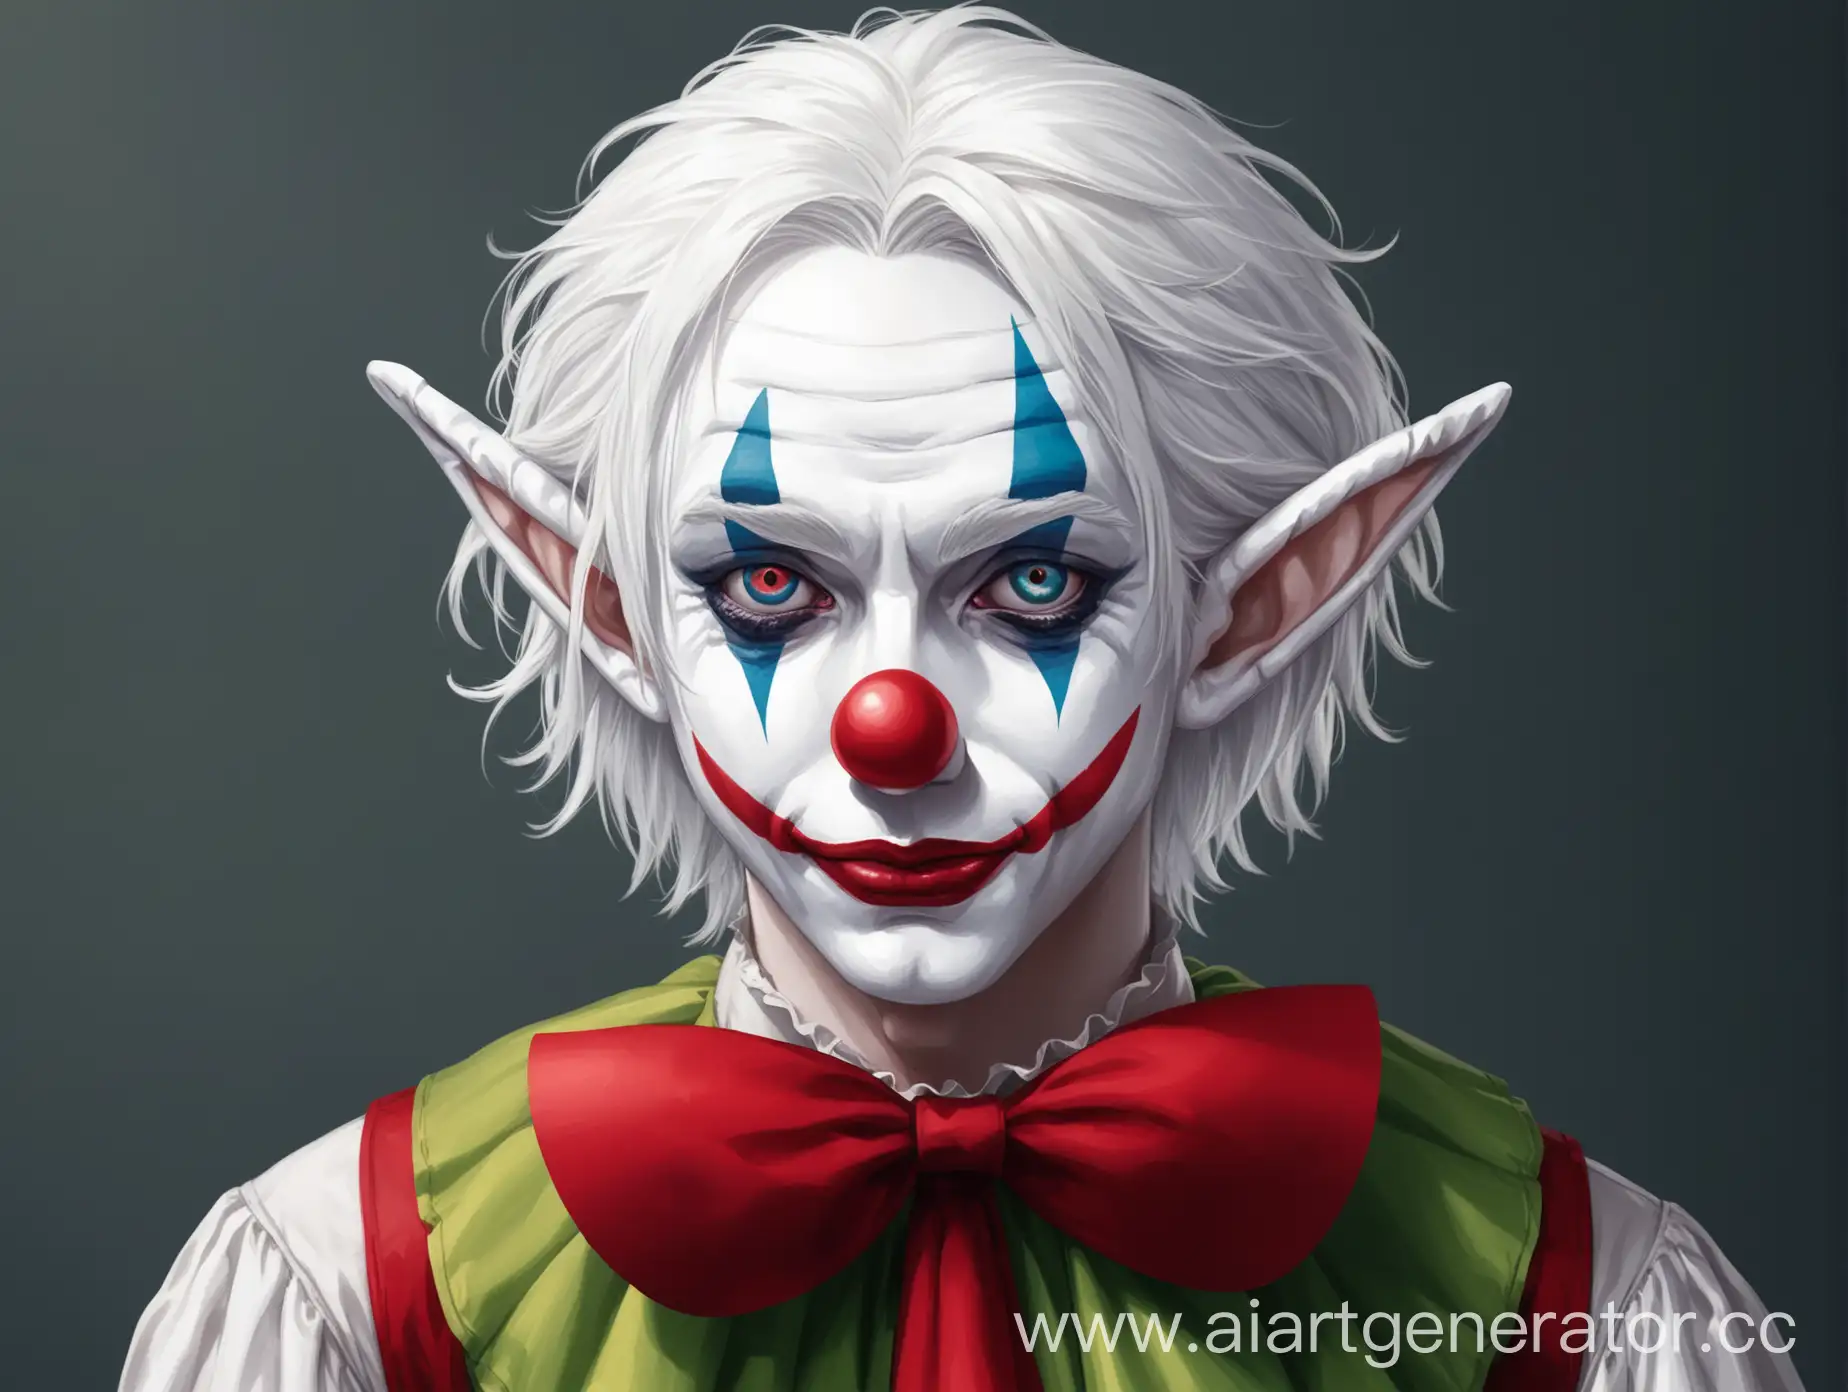 A guy with white skin, white hair and elf ears in a clown costume